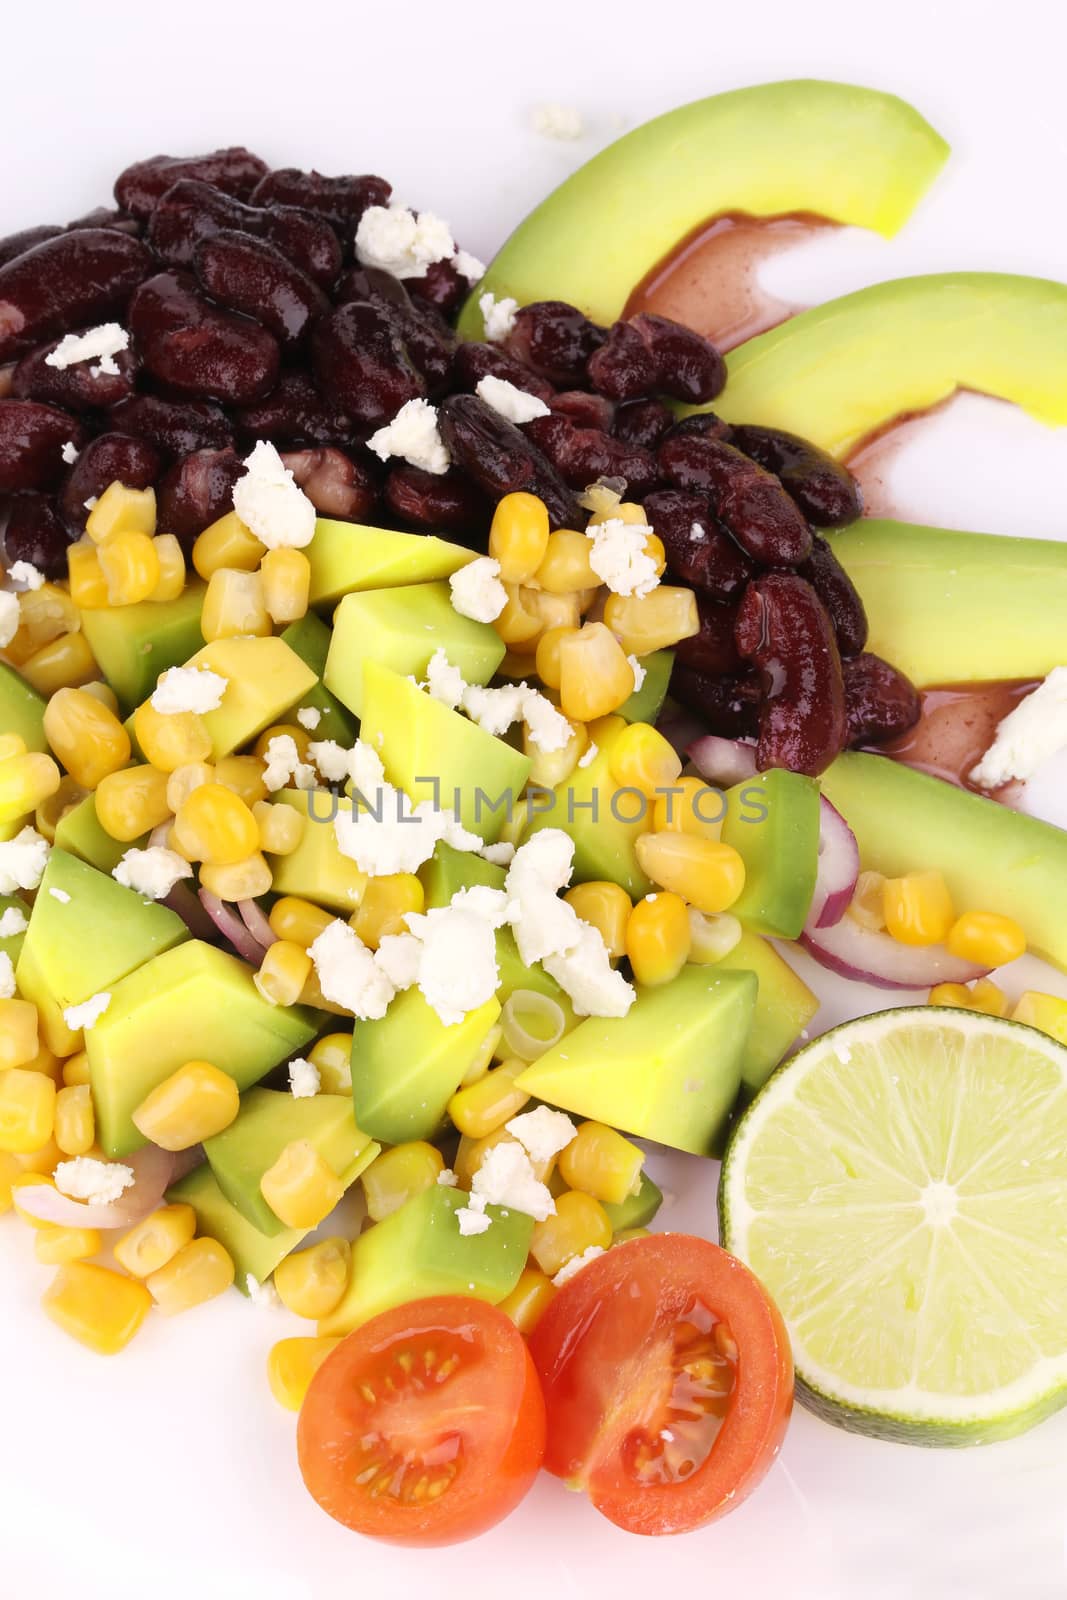 Red beans salad with avocado. Isolated on a white background.